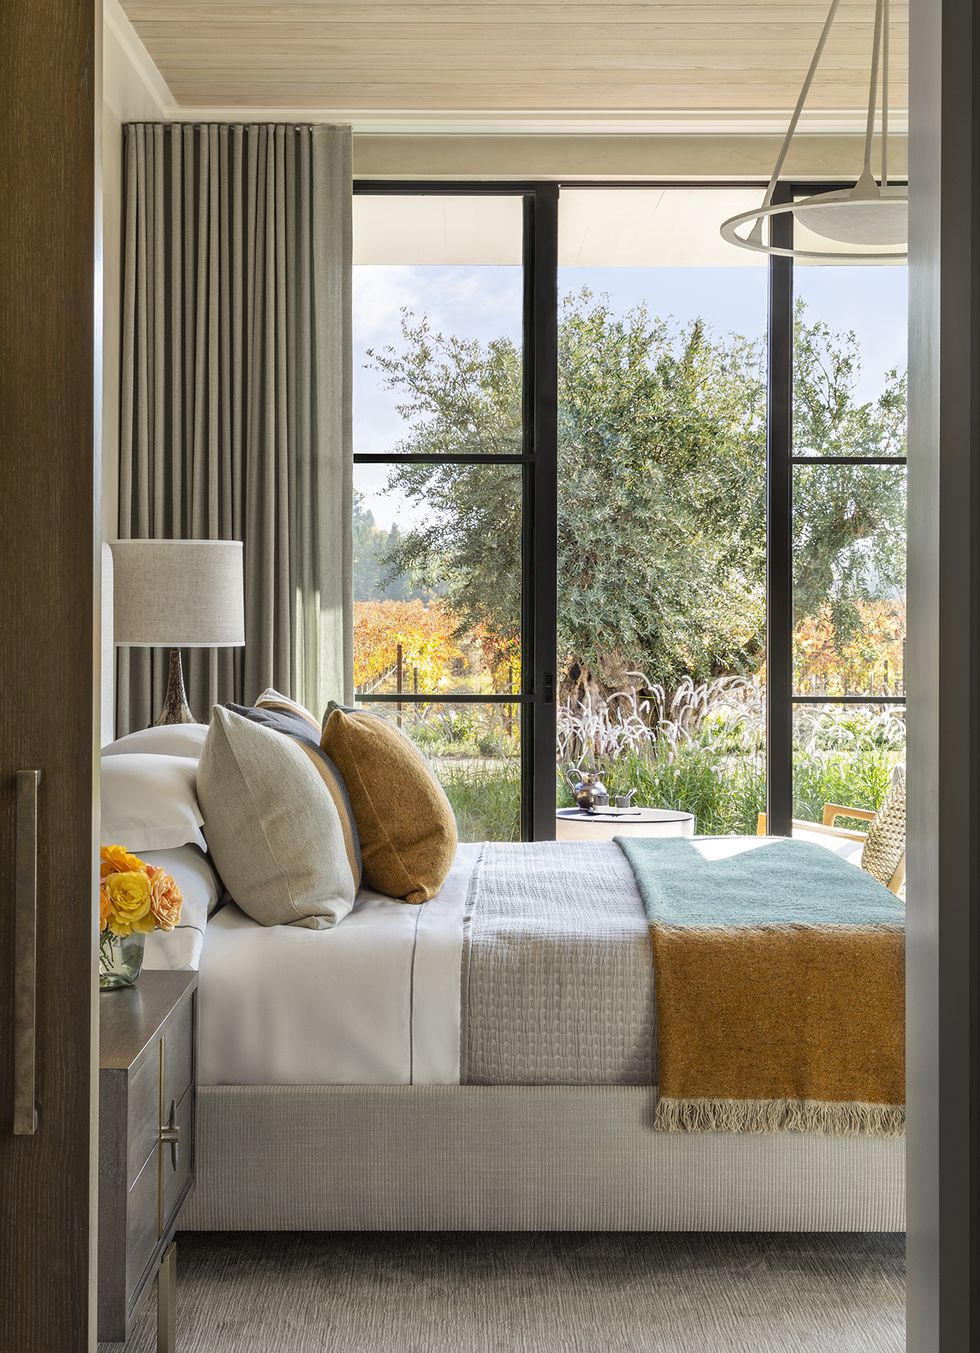 bedroom at the koman residence in napa valley, ca for marshall watson designs photographed by lisa romerein